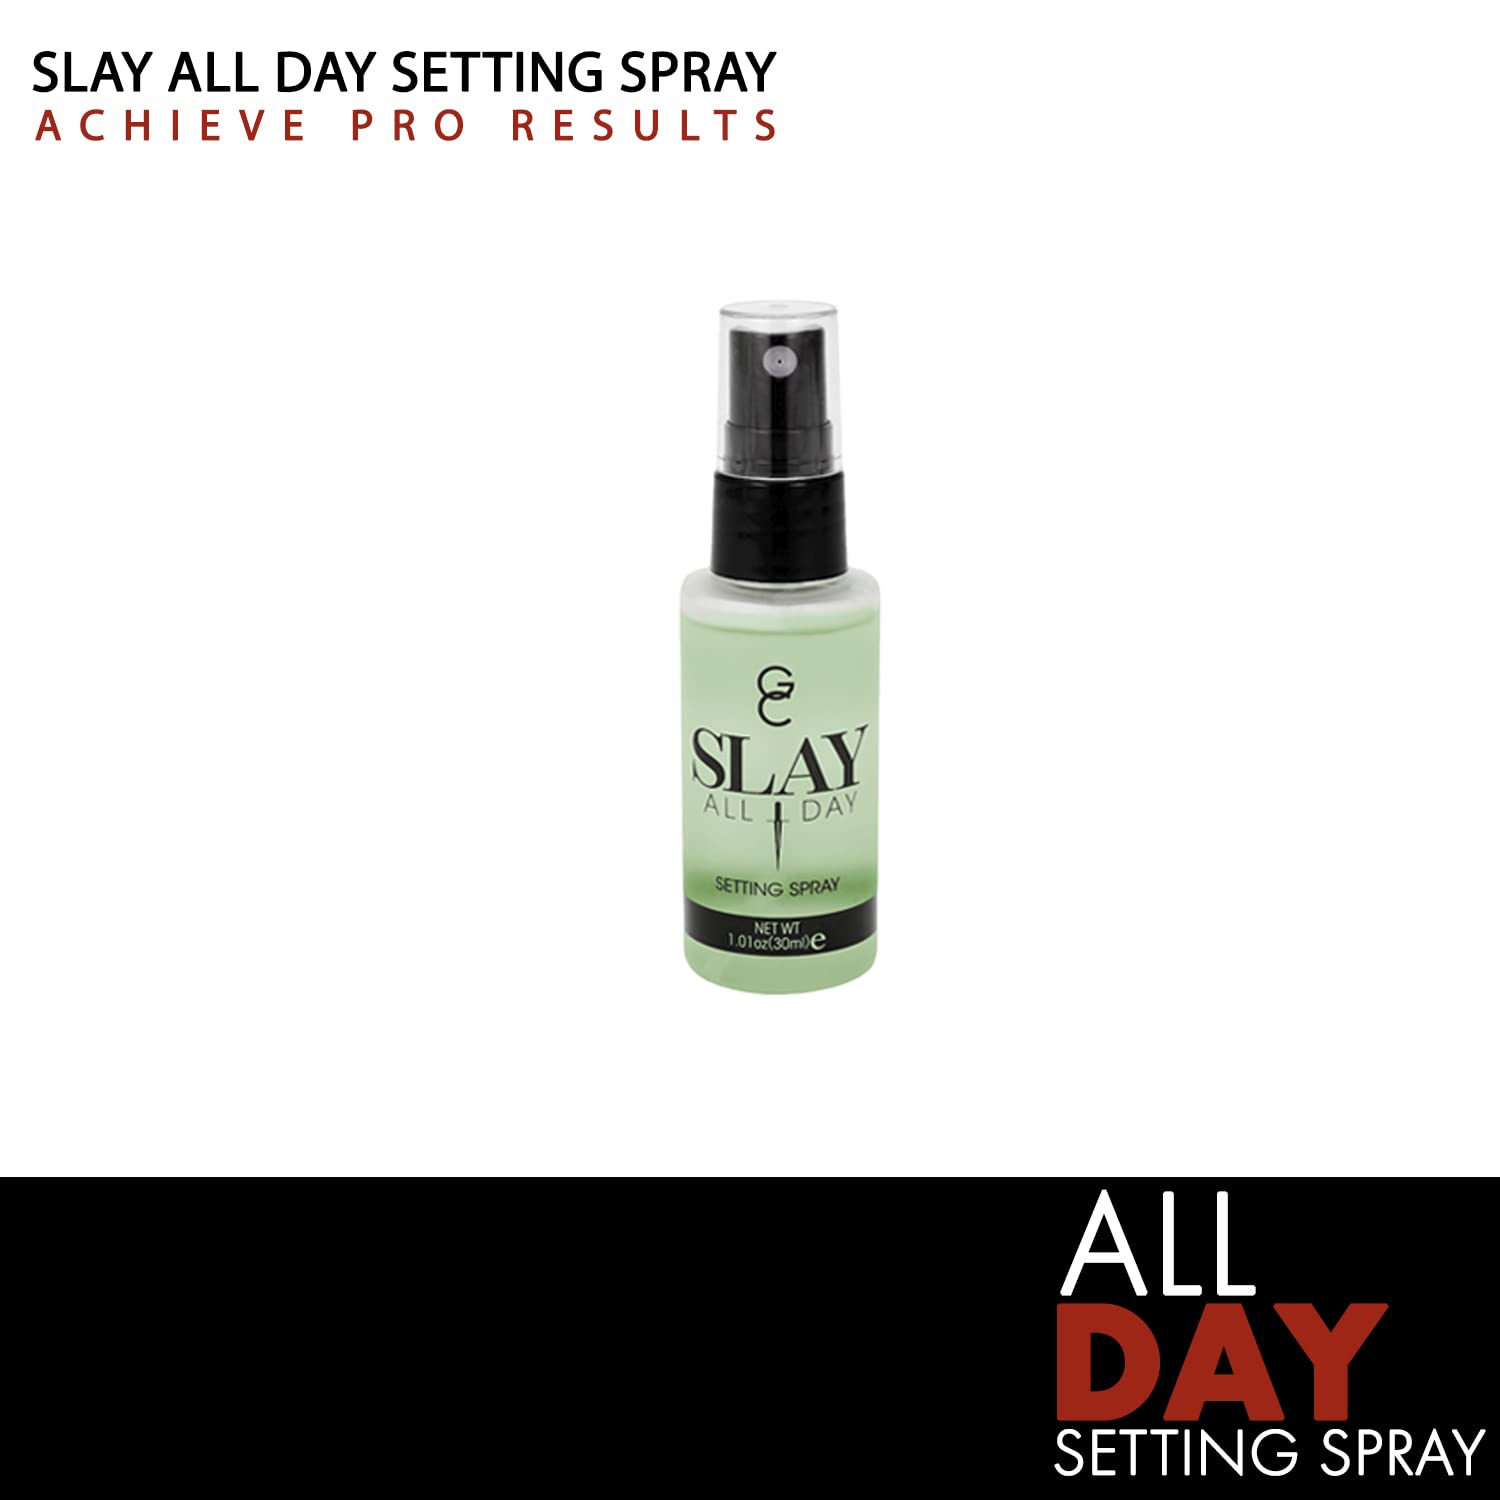 Gerard Cosmetics Slay All Day Setting Spray Mini - Controls Oil To Increase Makeup Longevity - Maintains Optimal Hydration - Prevents Makeup from Settling in Pores - Mint Chocolate Chip - 3.38 oz